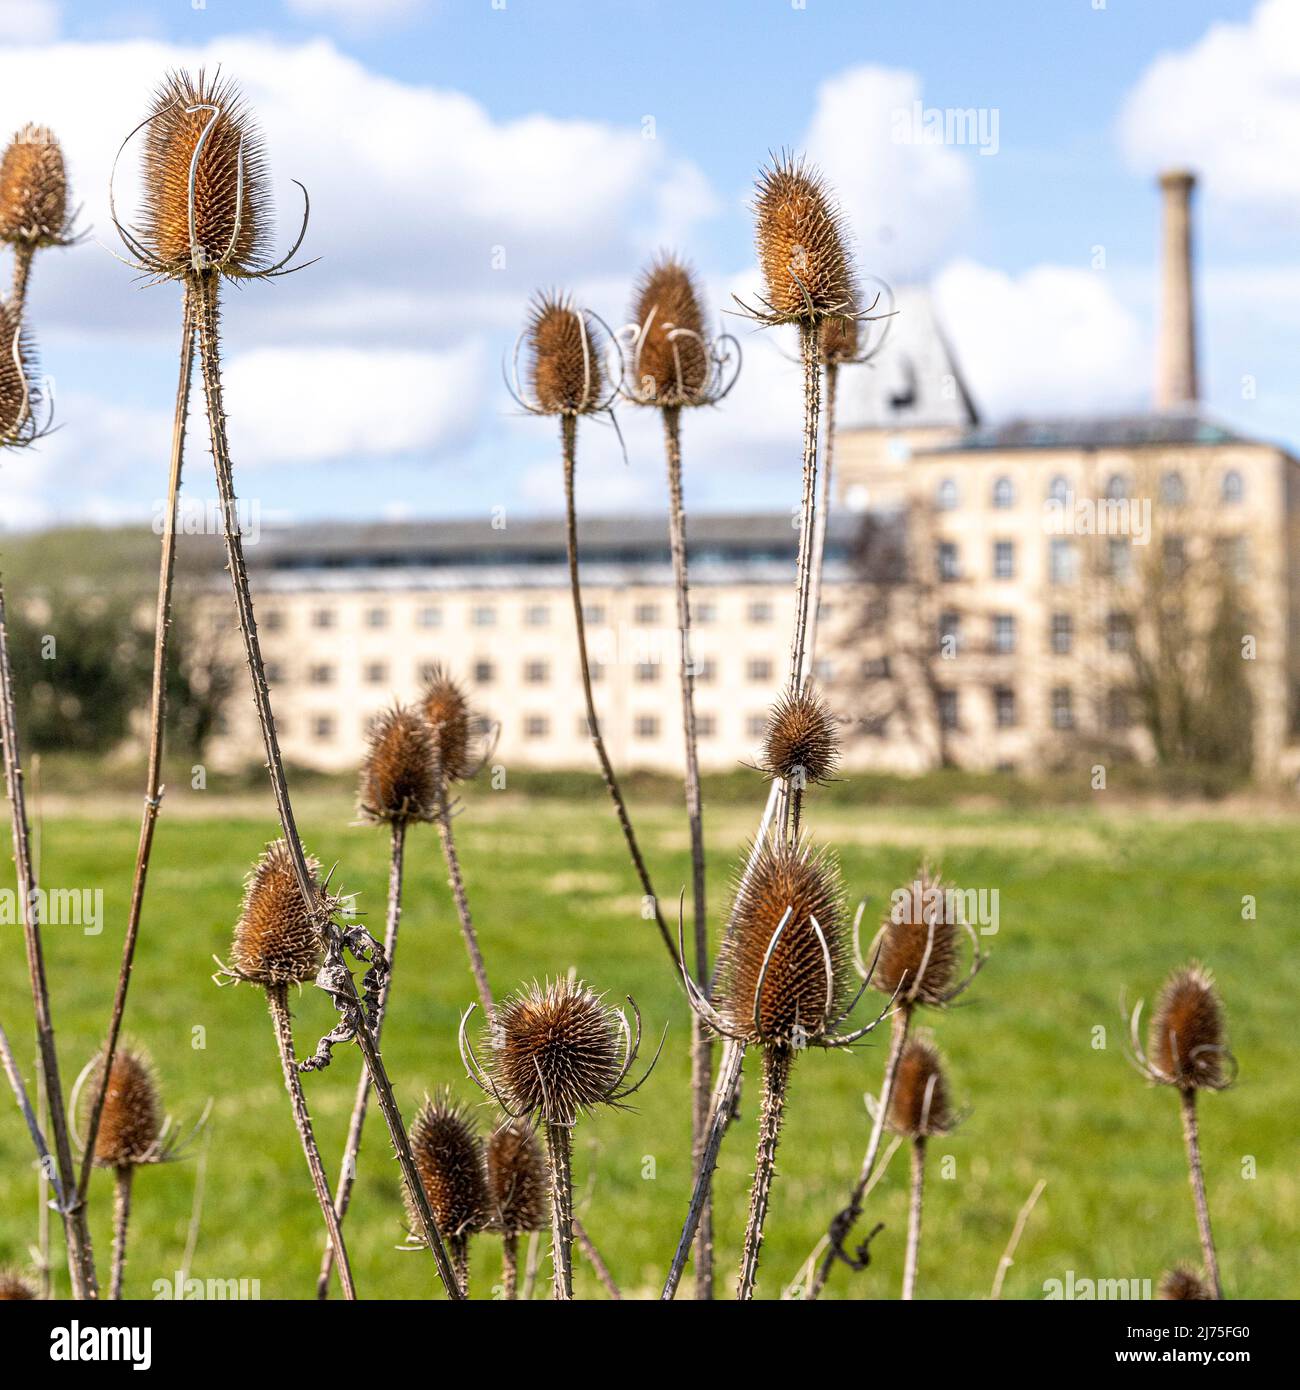 Teasels growing on Ebley Meadows in front of Ebley Mill, a 19th century cloth mill now converted into offices for Stroud District Council, Ebley, Glou Stock Photo